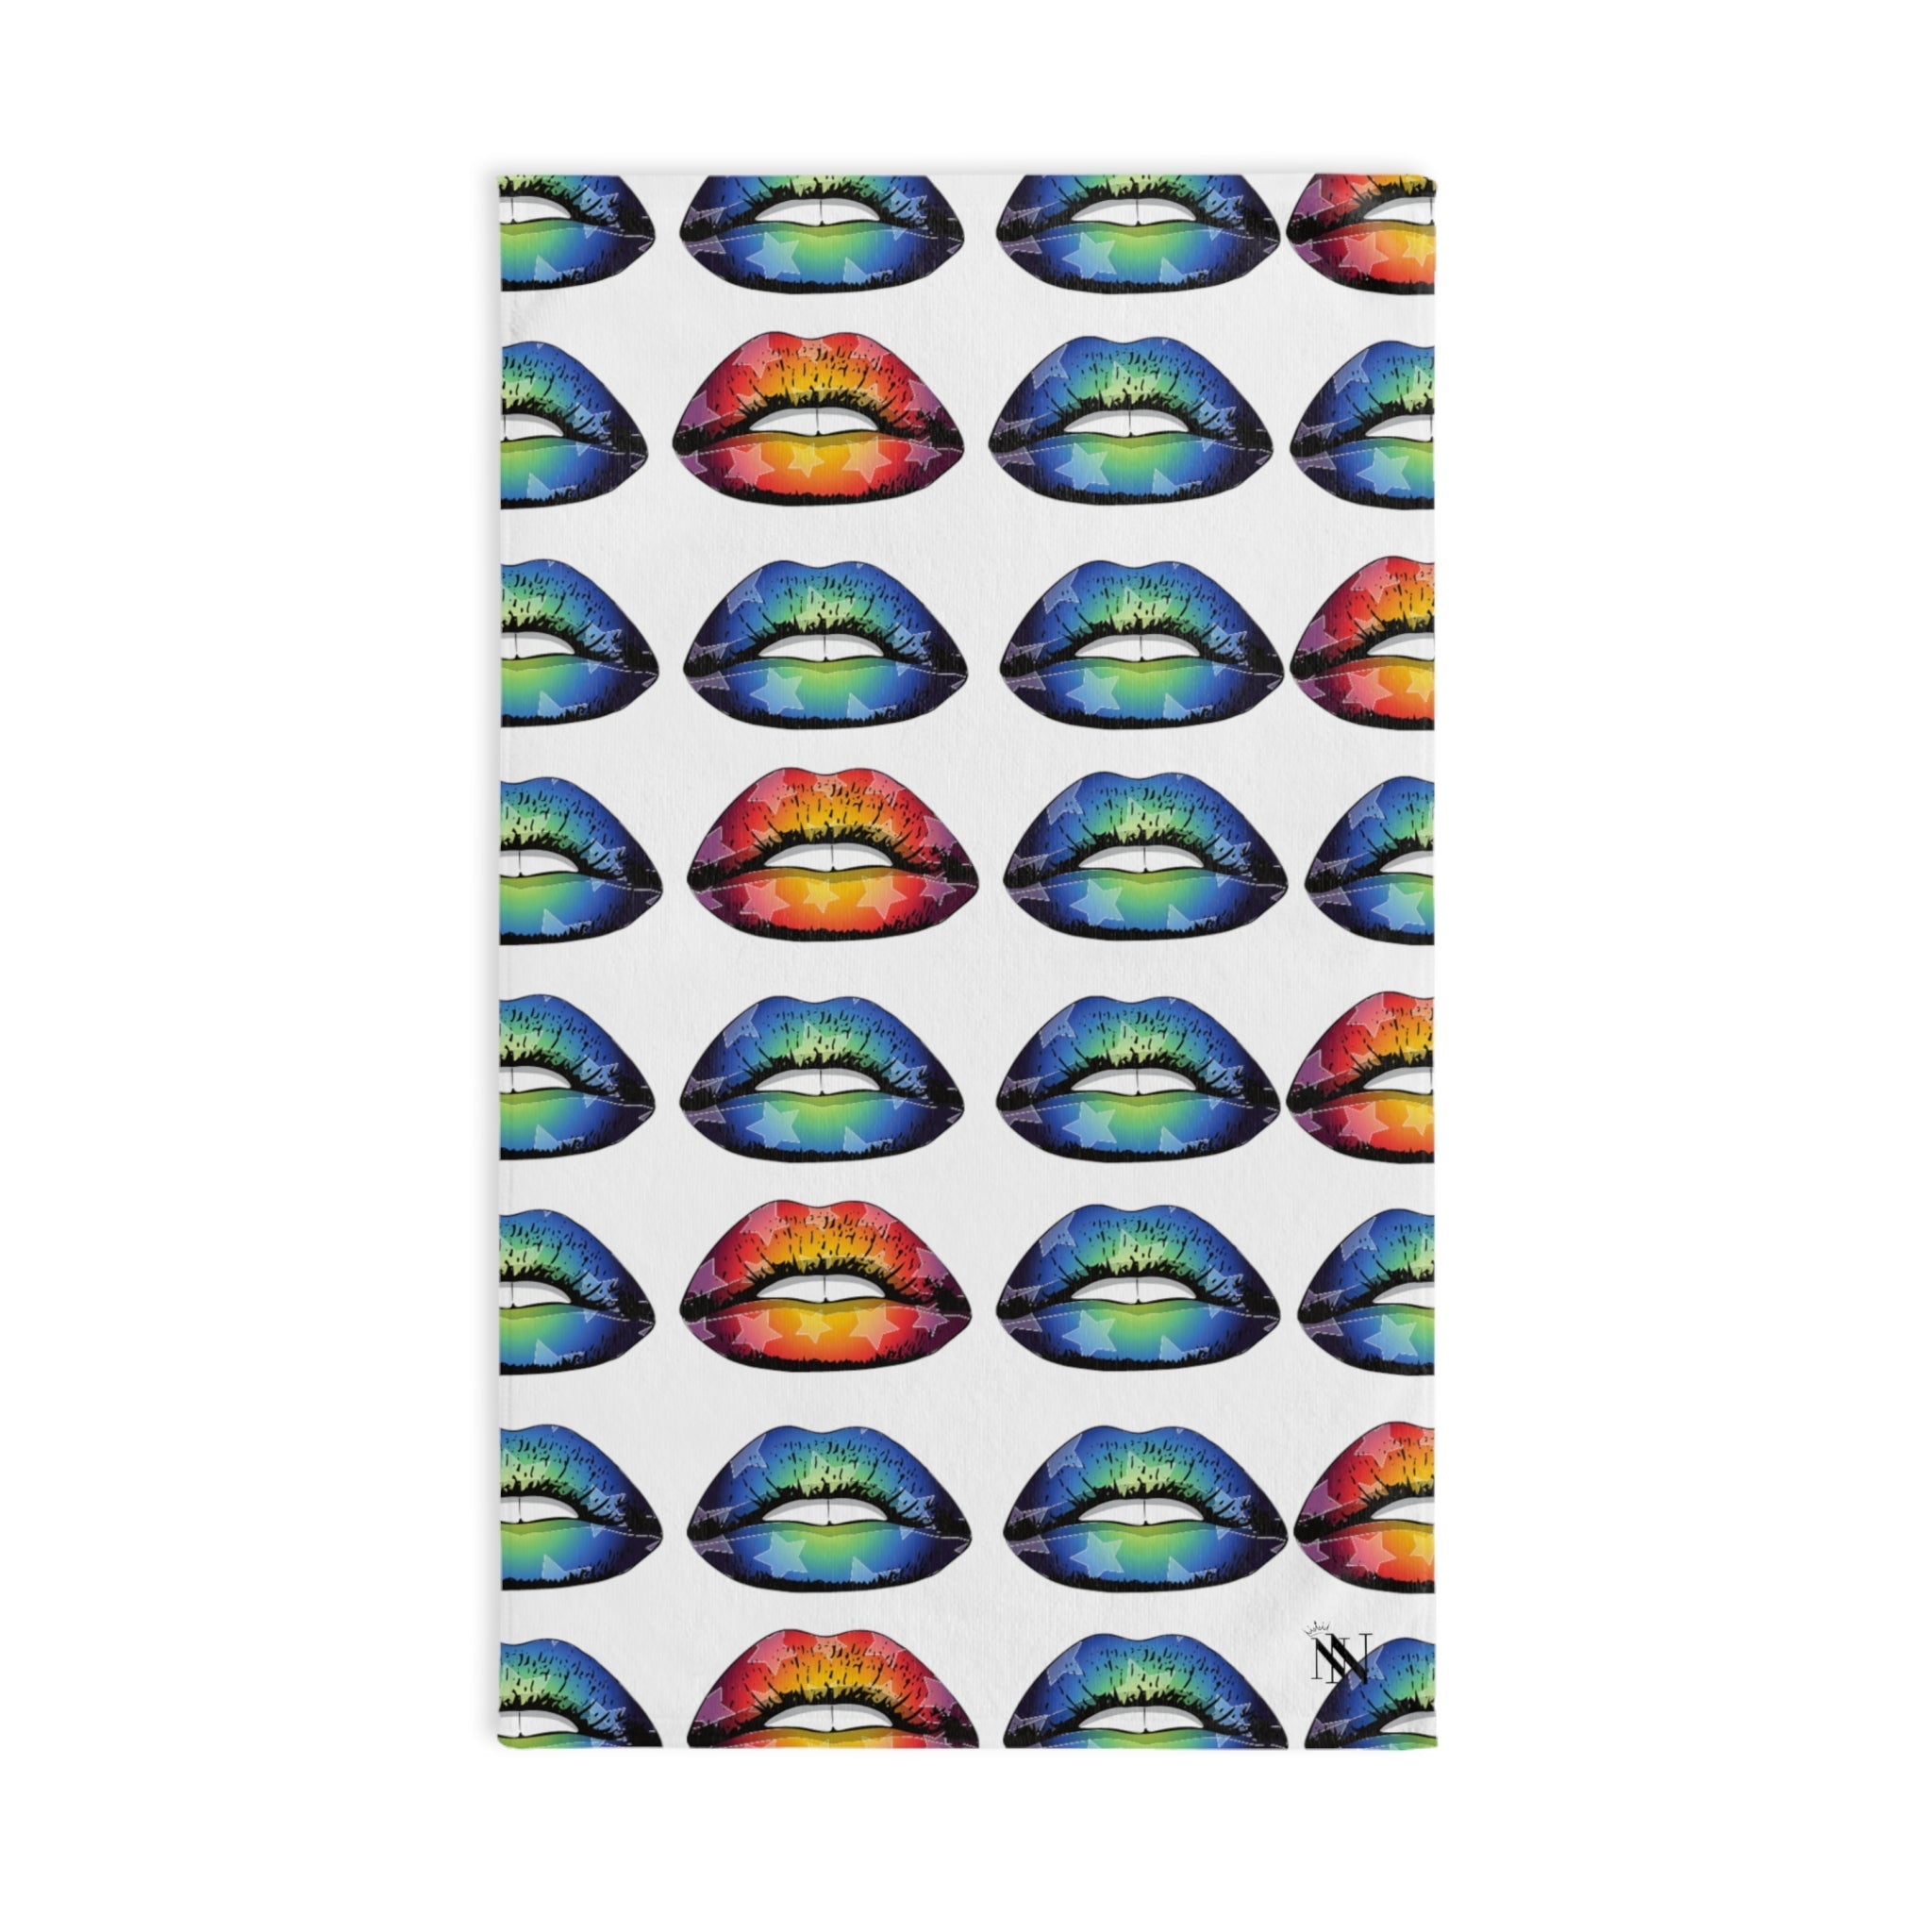 Blue Lips Pattern White | Funny Gifts for Men - Gifts for Him - Birthday Gifts for Men, Him, Her, Husband, Boyfriend, Girlfriend, New Couple Gifts, Fathers & Valentines Day Gifts, Christmas Gifts NECTAR NAPKINS